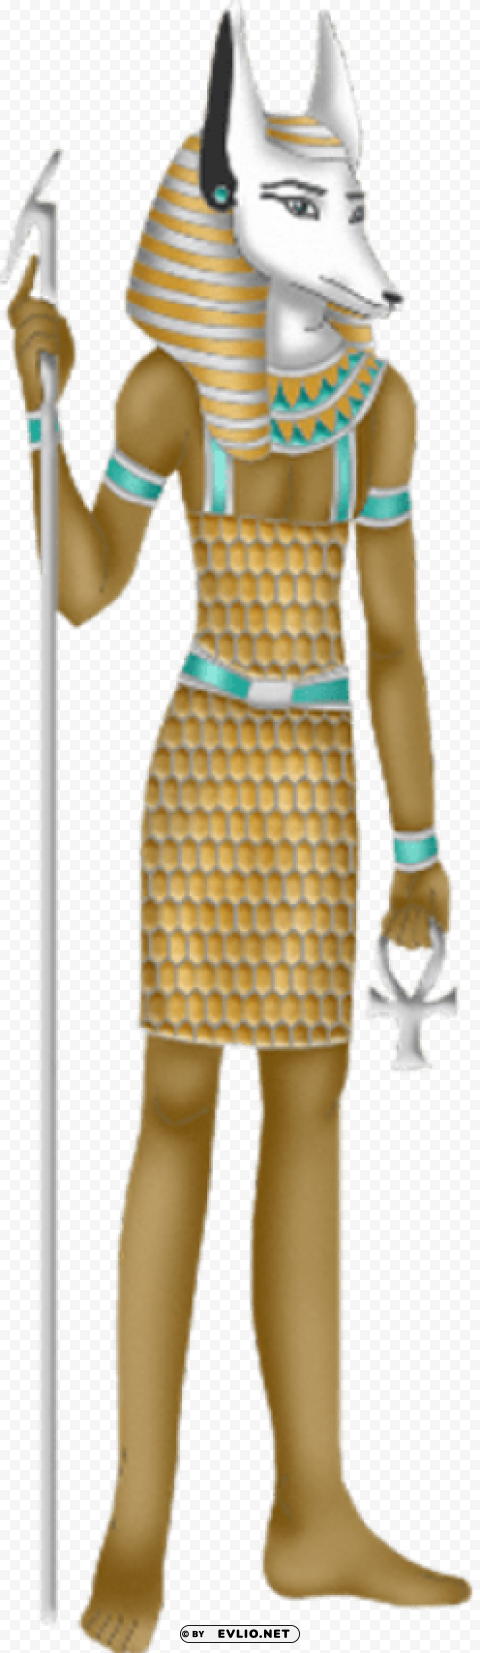 Pharaonic drawings Free PNG images with transparent layers